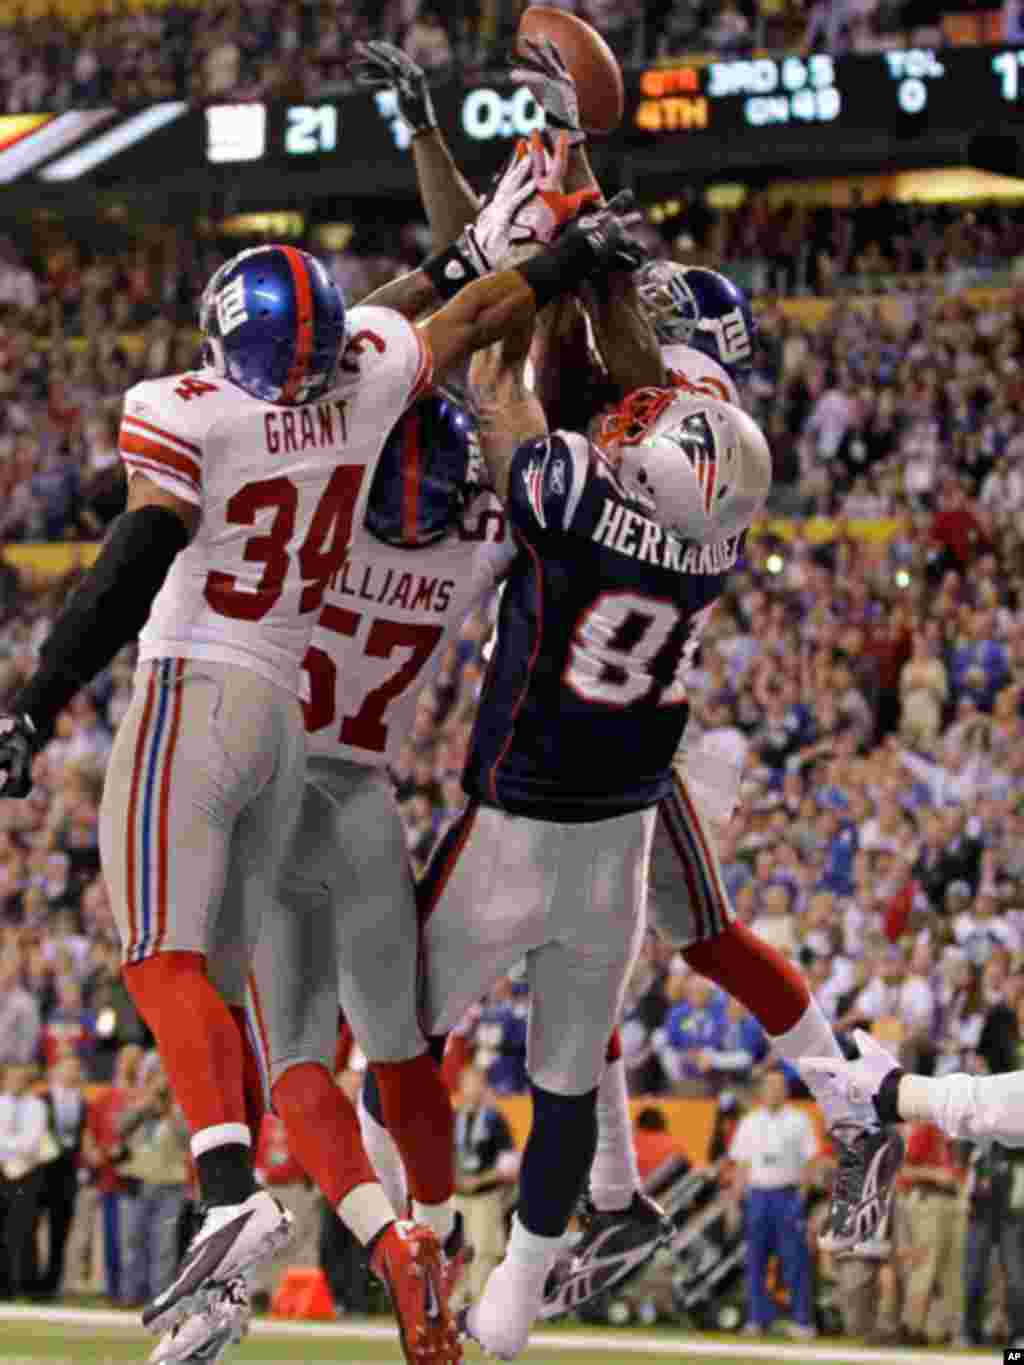 New York Giants safety Deon Grant (34), linebacker Jacquian Williams (57) and safety Kenny Phillips (21) block the final pass to New England Patriots tight end Aaron Hernandez (81) in the NFL Super Bowl XLVI football game, on February 5, 2012 in Indianapo